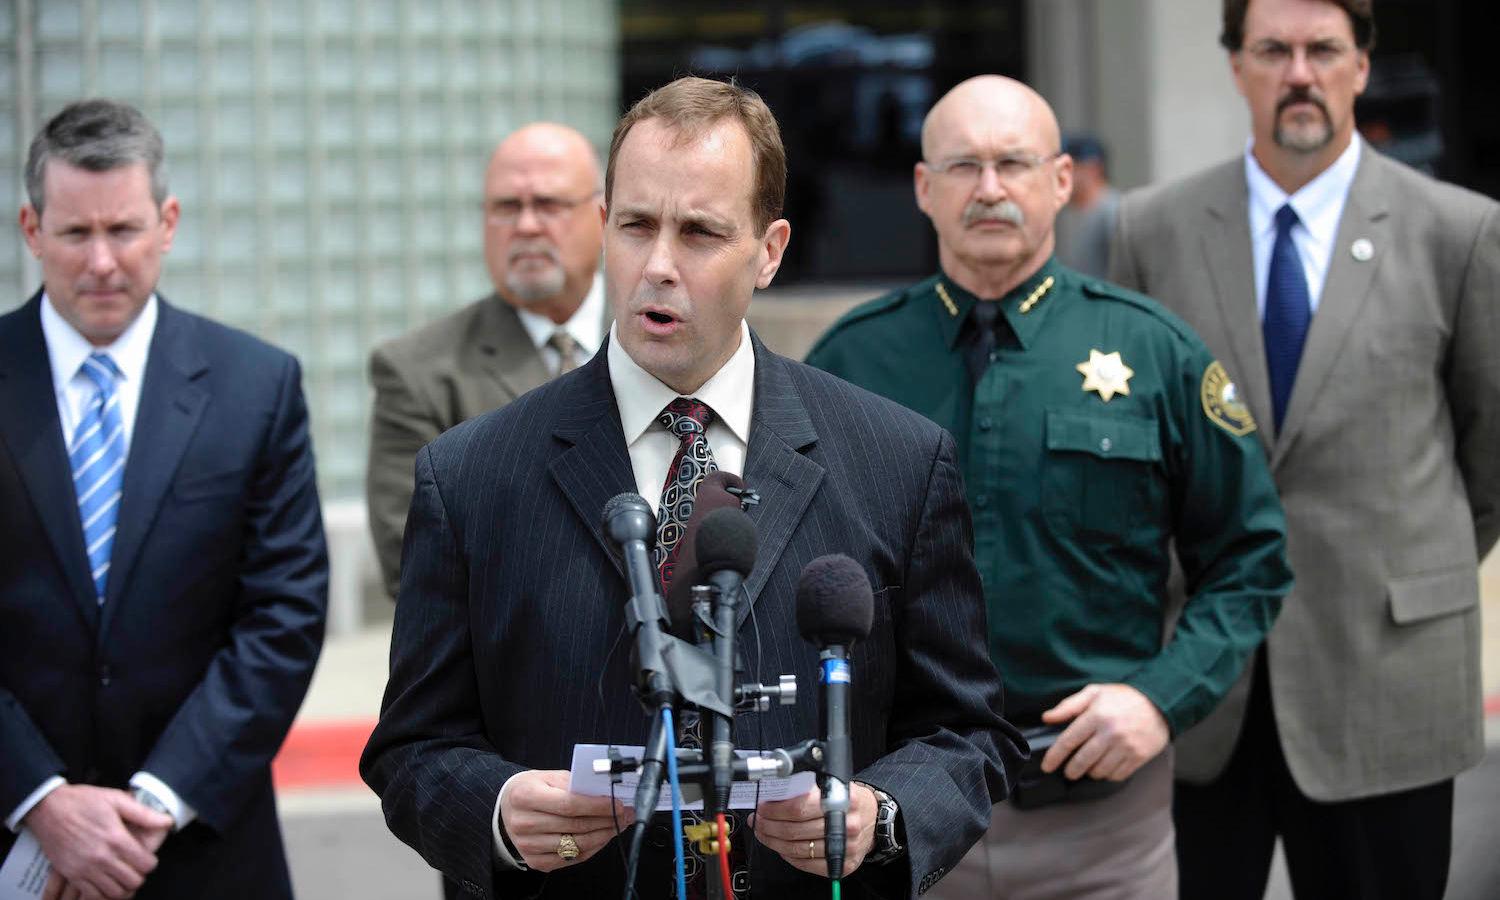 GOLDEN, CO&#8211; FBI, Special Agent in Charge, Jim Yacone, center, along with  Jeffco Sheriff&#8217;s office, ATF agents and U.S. attorneys at a press conference at the Jefferson County Sheriff&#8217;s office headquarters announcing the arrest of Southwest Mall bomb suspect, Earl Albert Moore Tuesday afternoon. Moore was arrested Tuesday morning a...